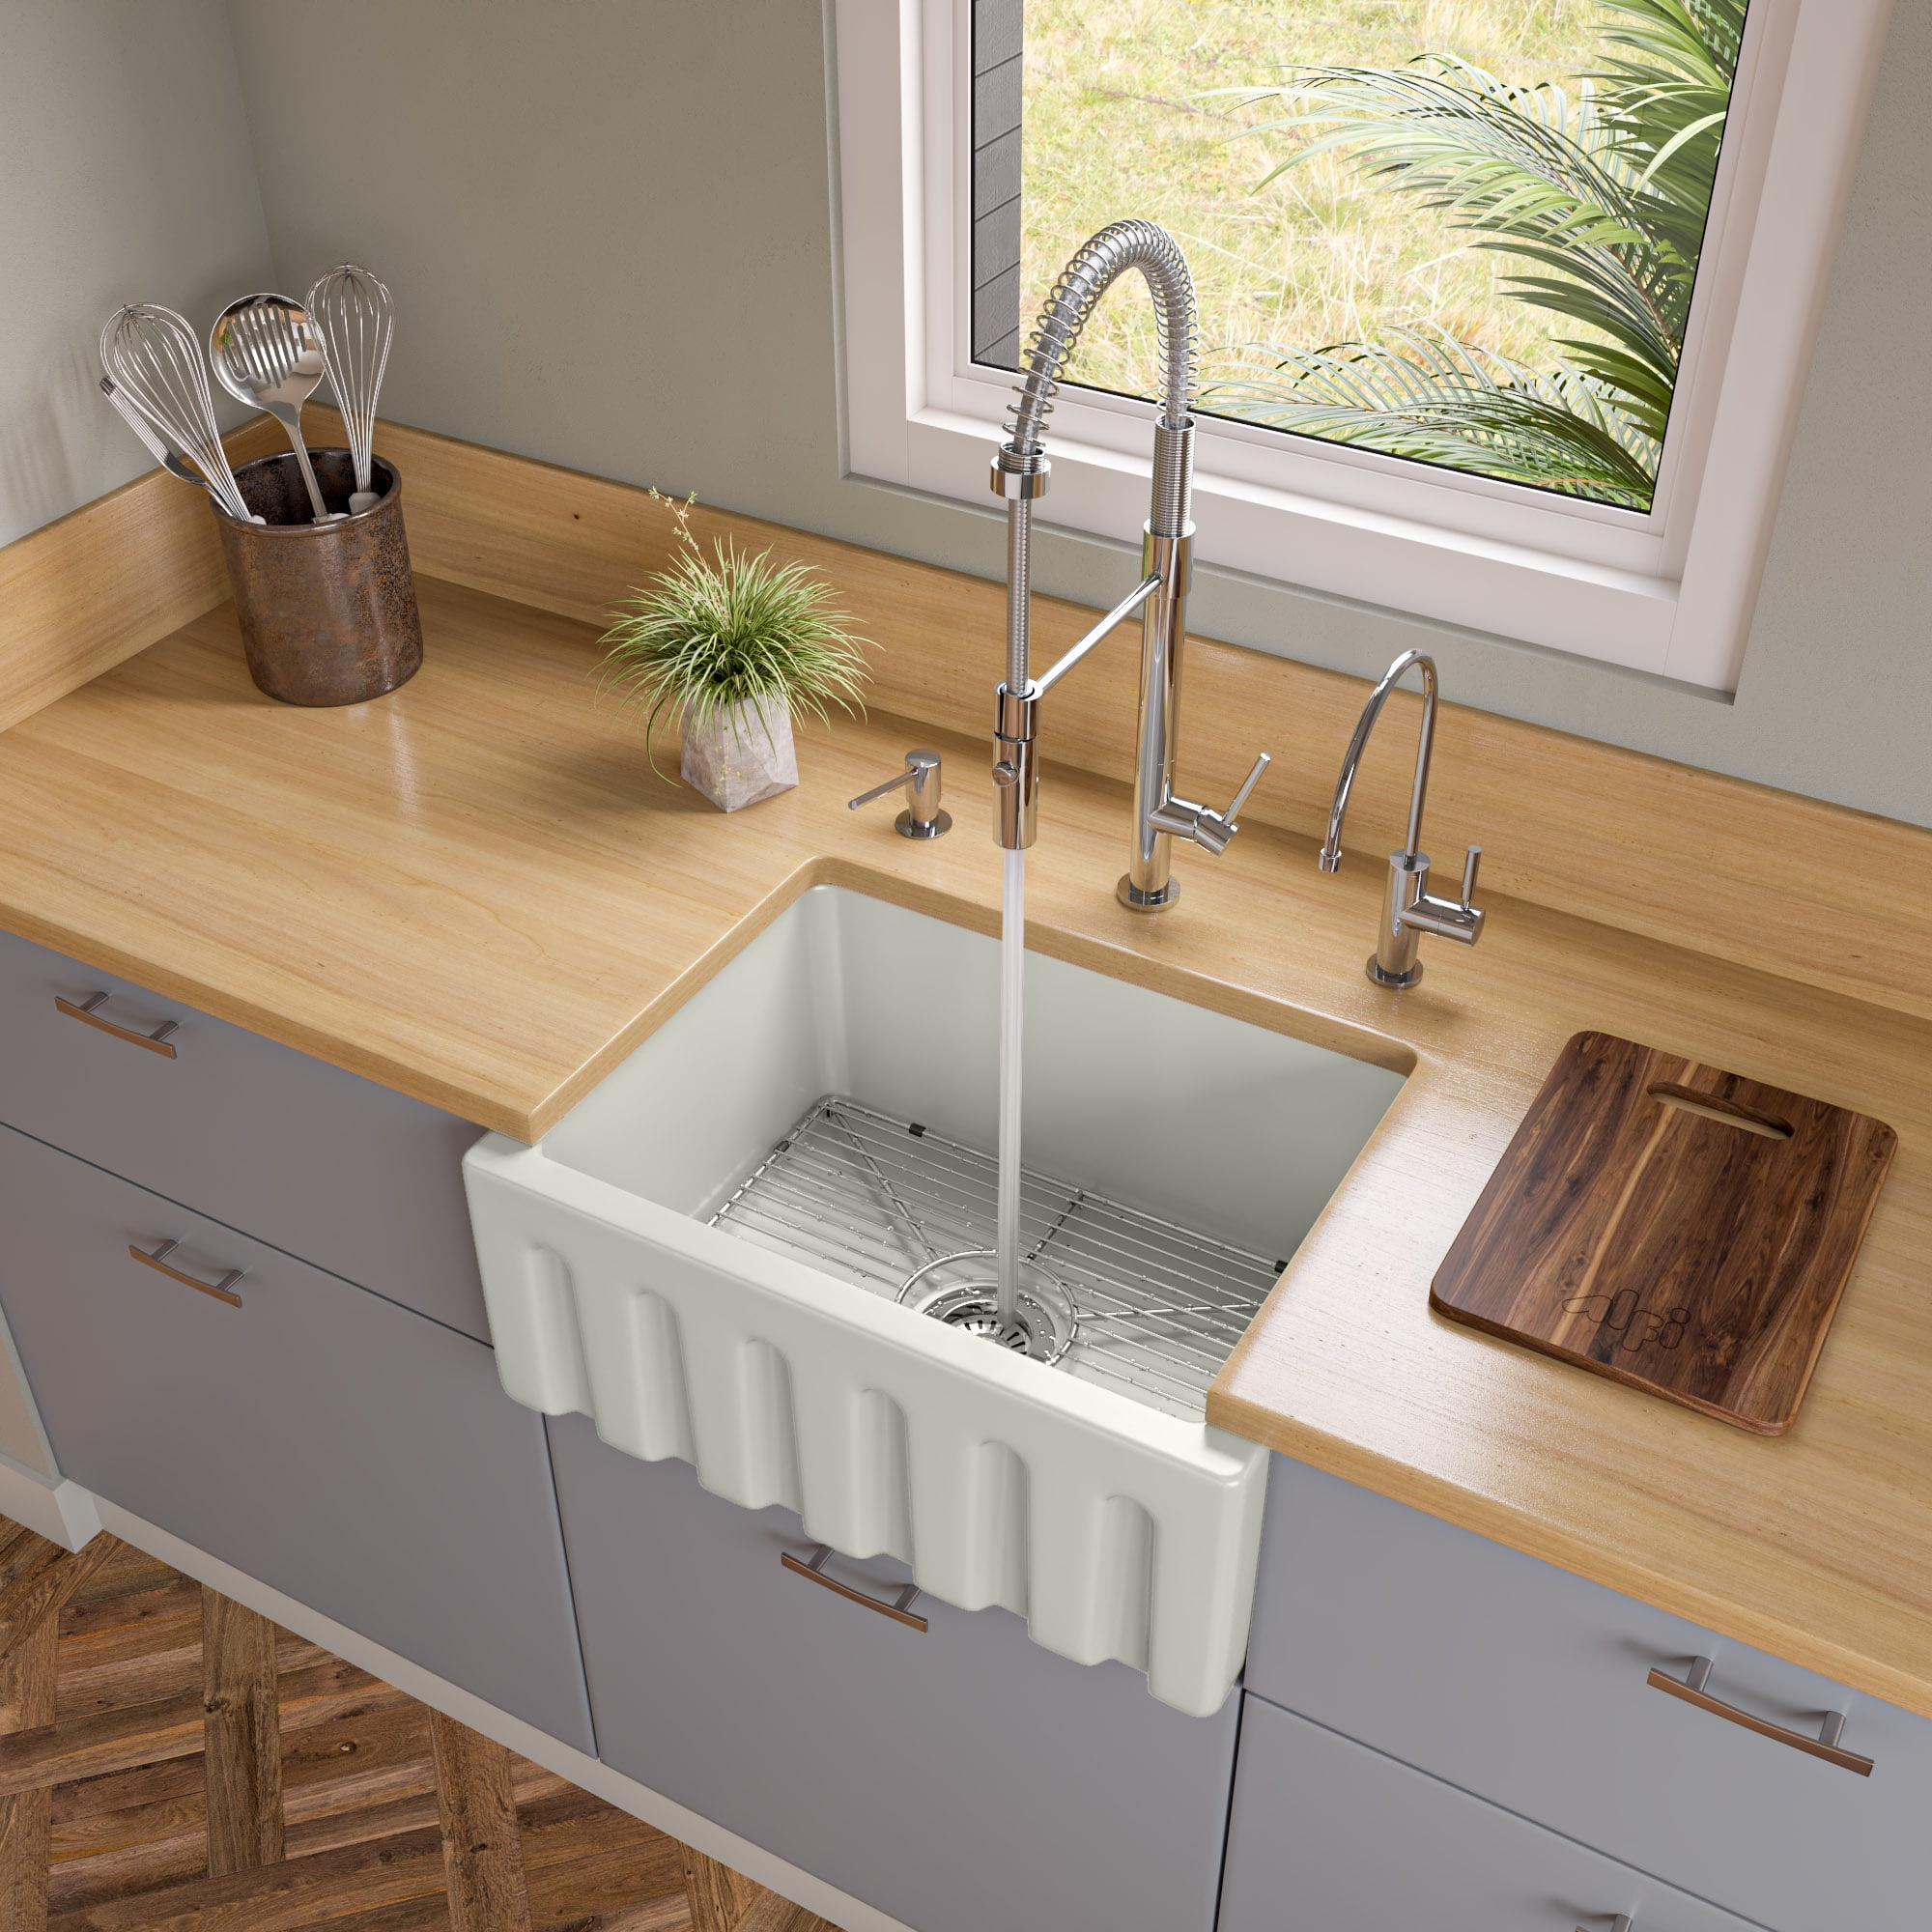 24 In. Reversible Smooth & Fluted Single Bowl Fireclay Farm Sink - Biscuit